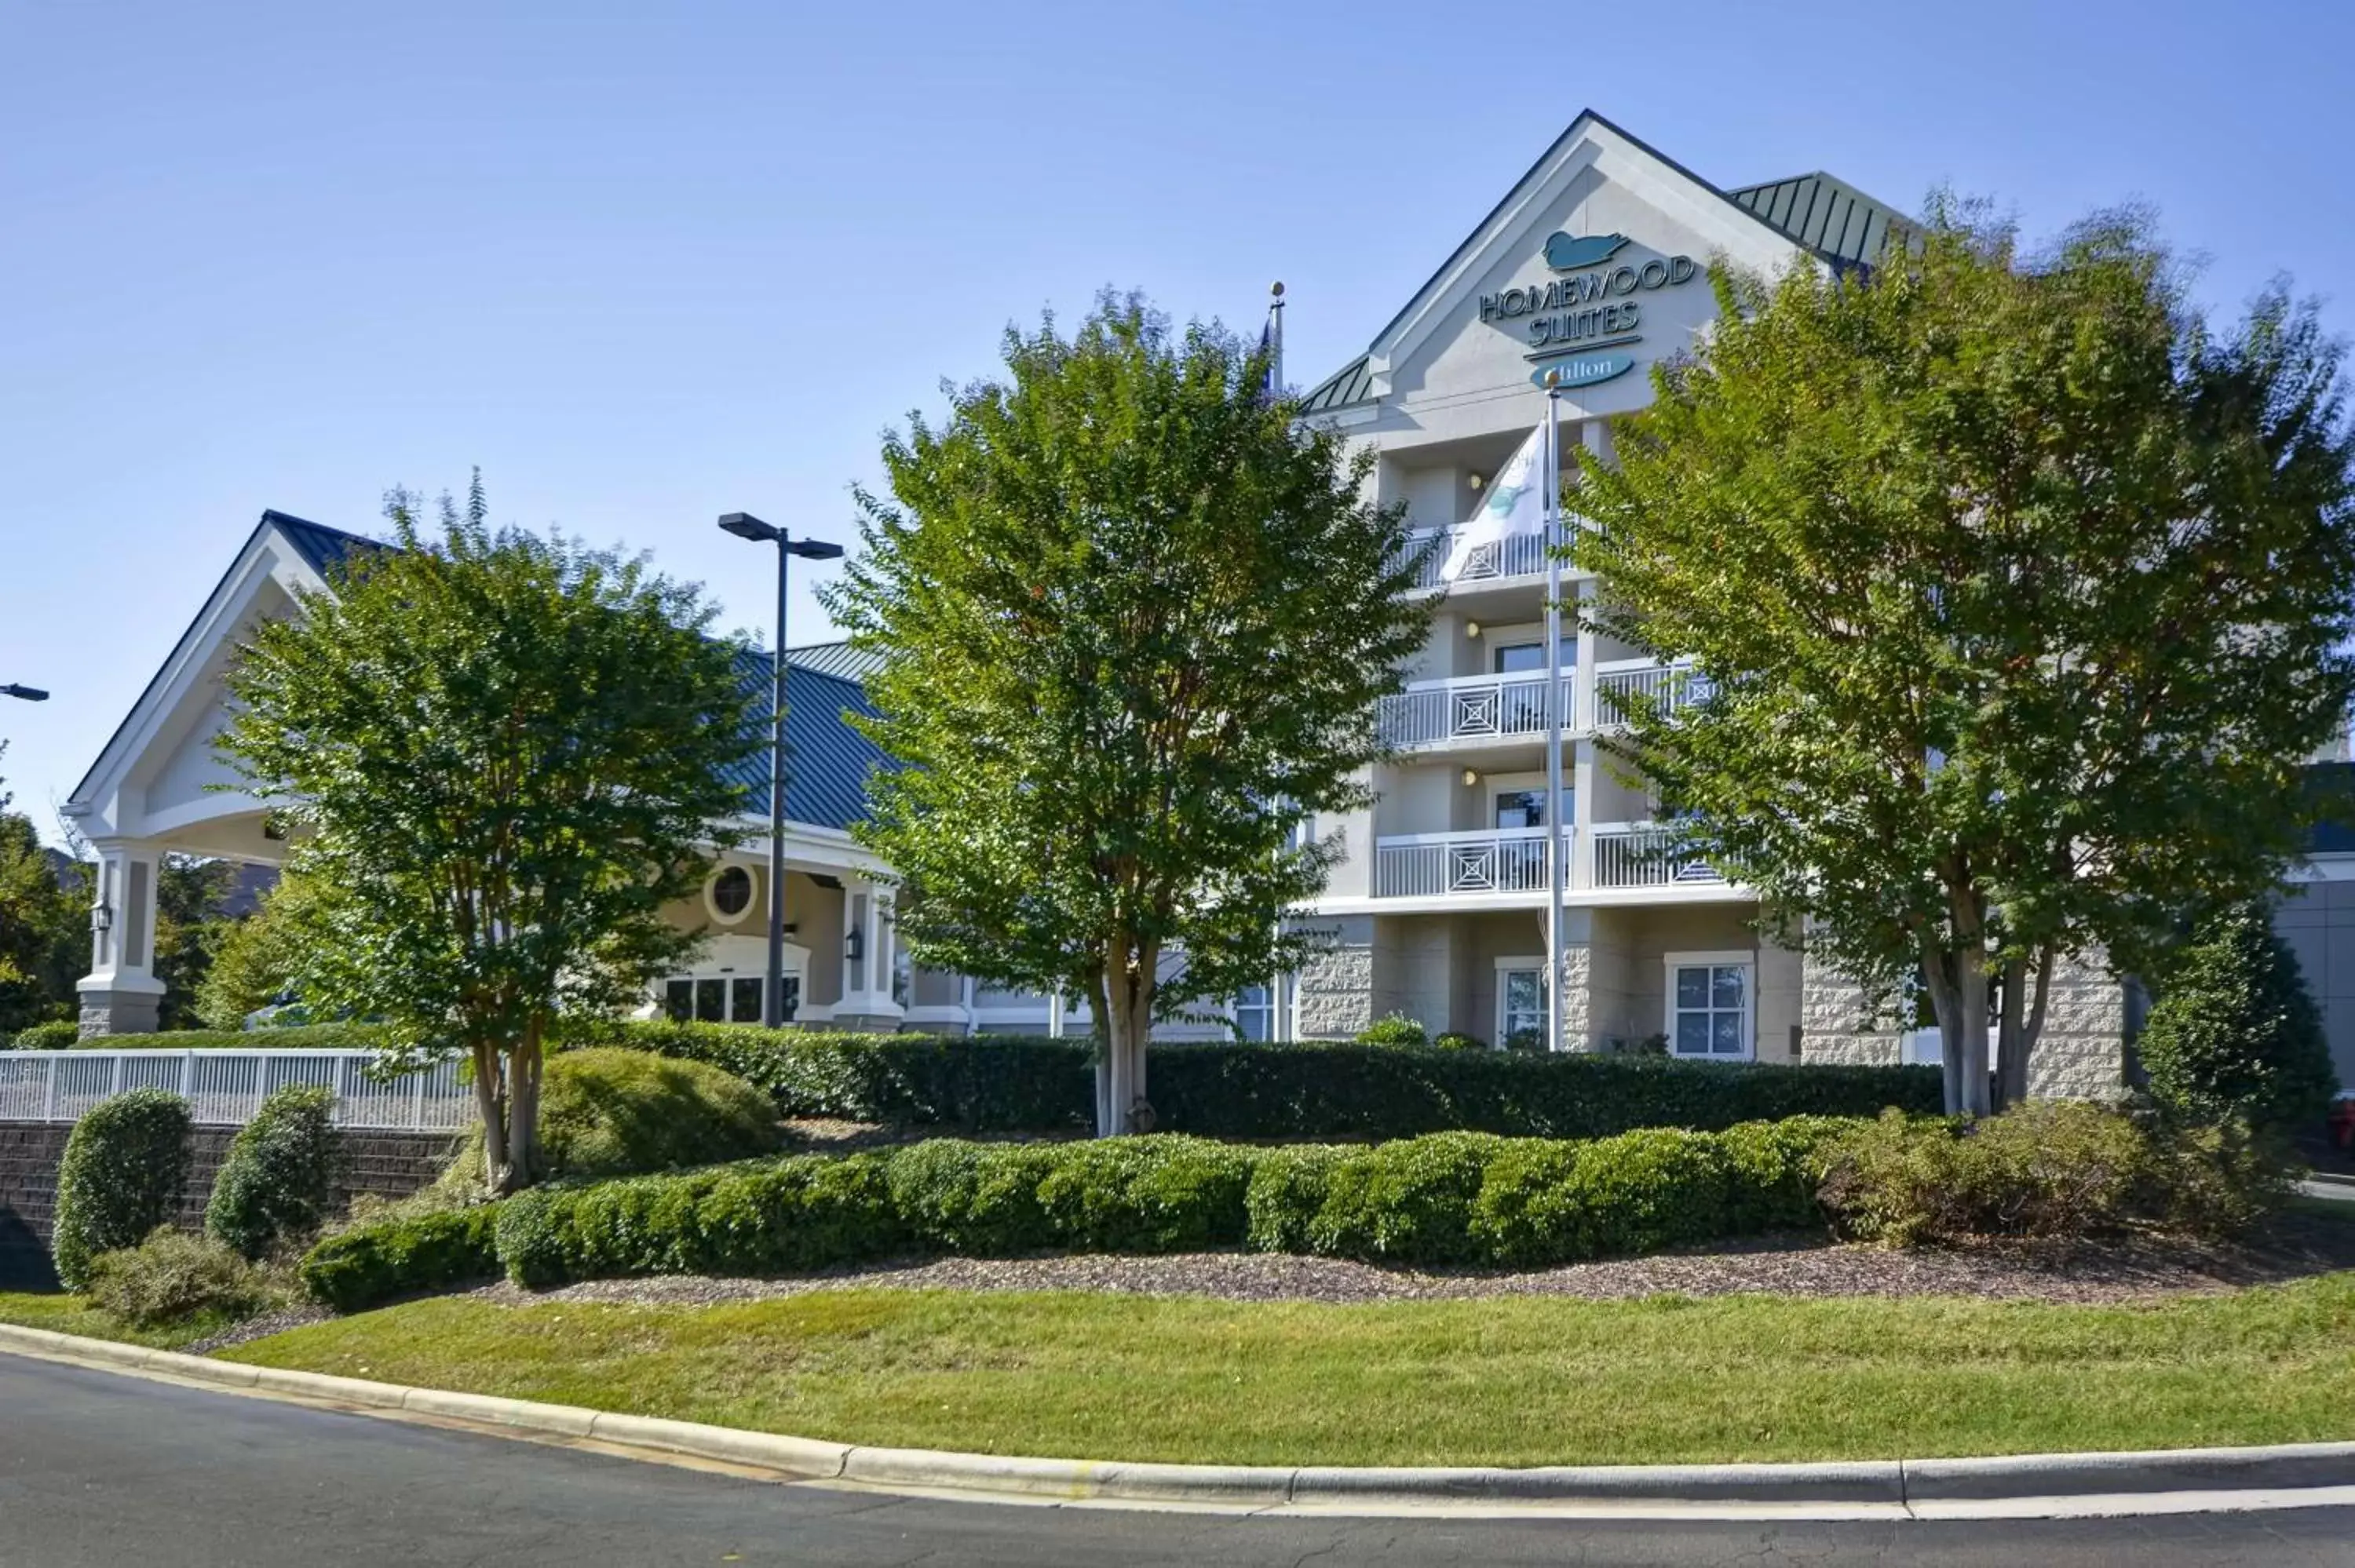 Property Building in Homewood Suites Durham-Chapel Hill I-40